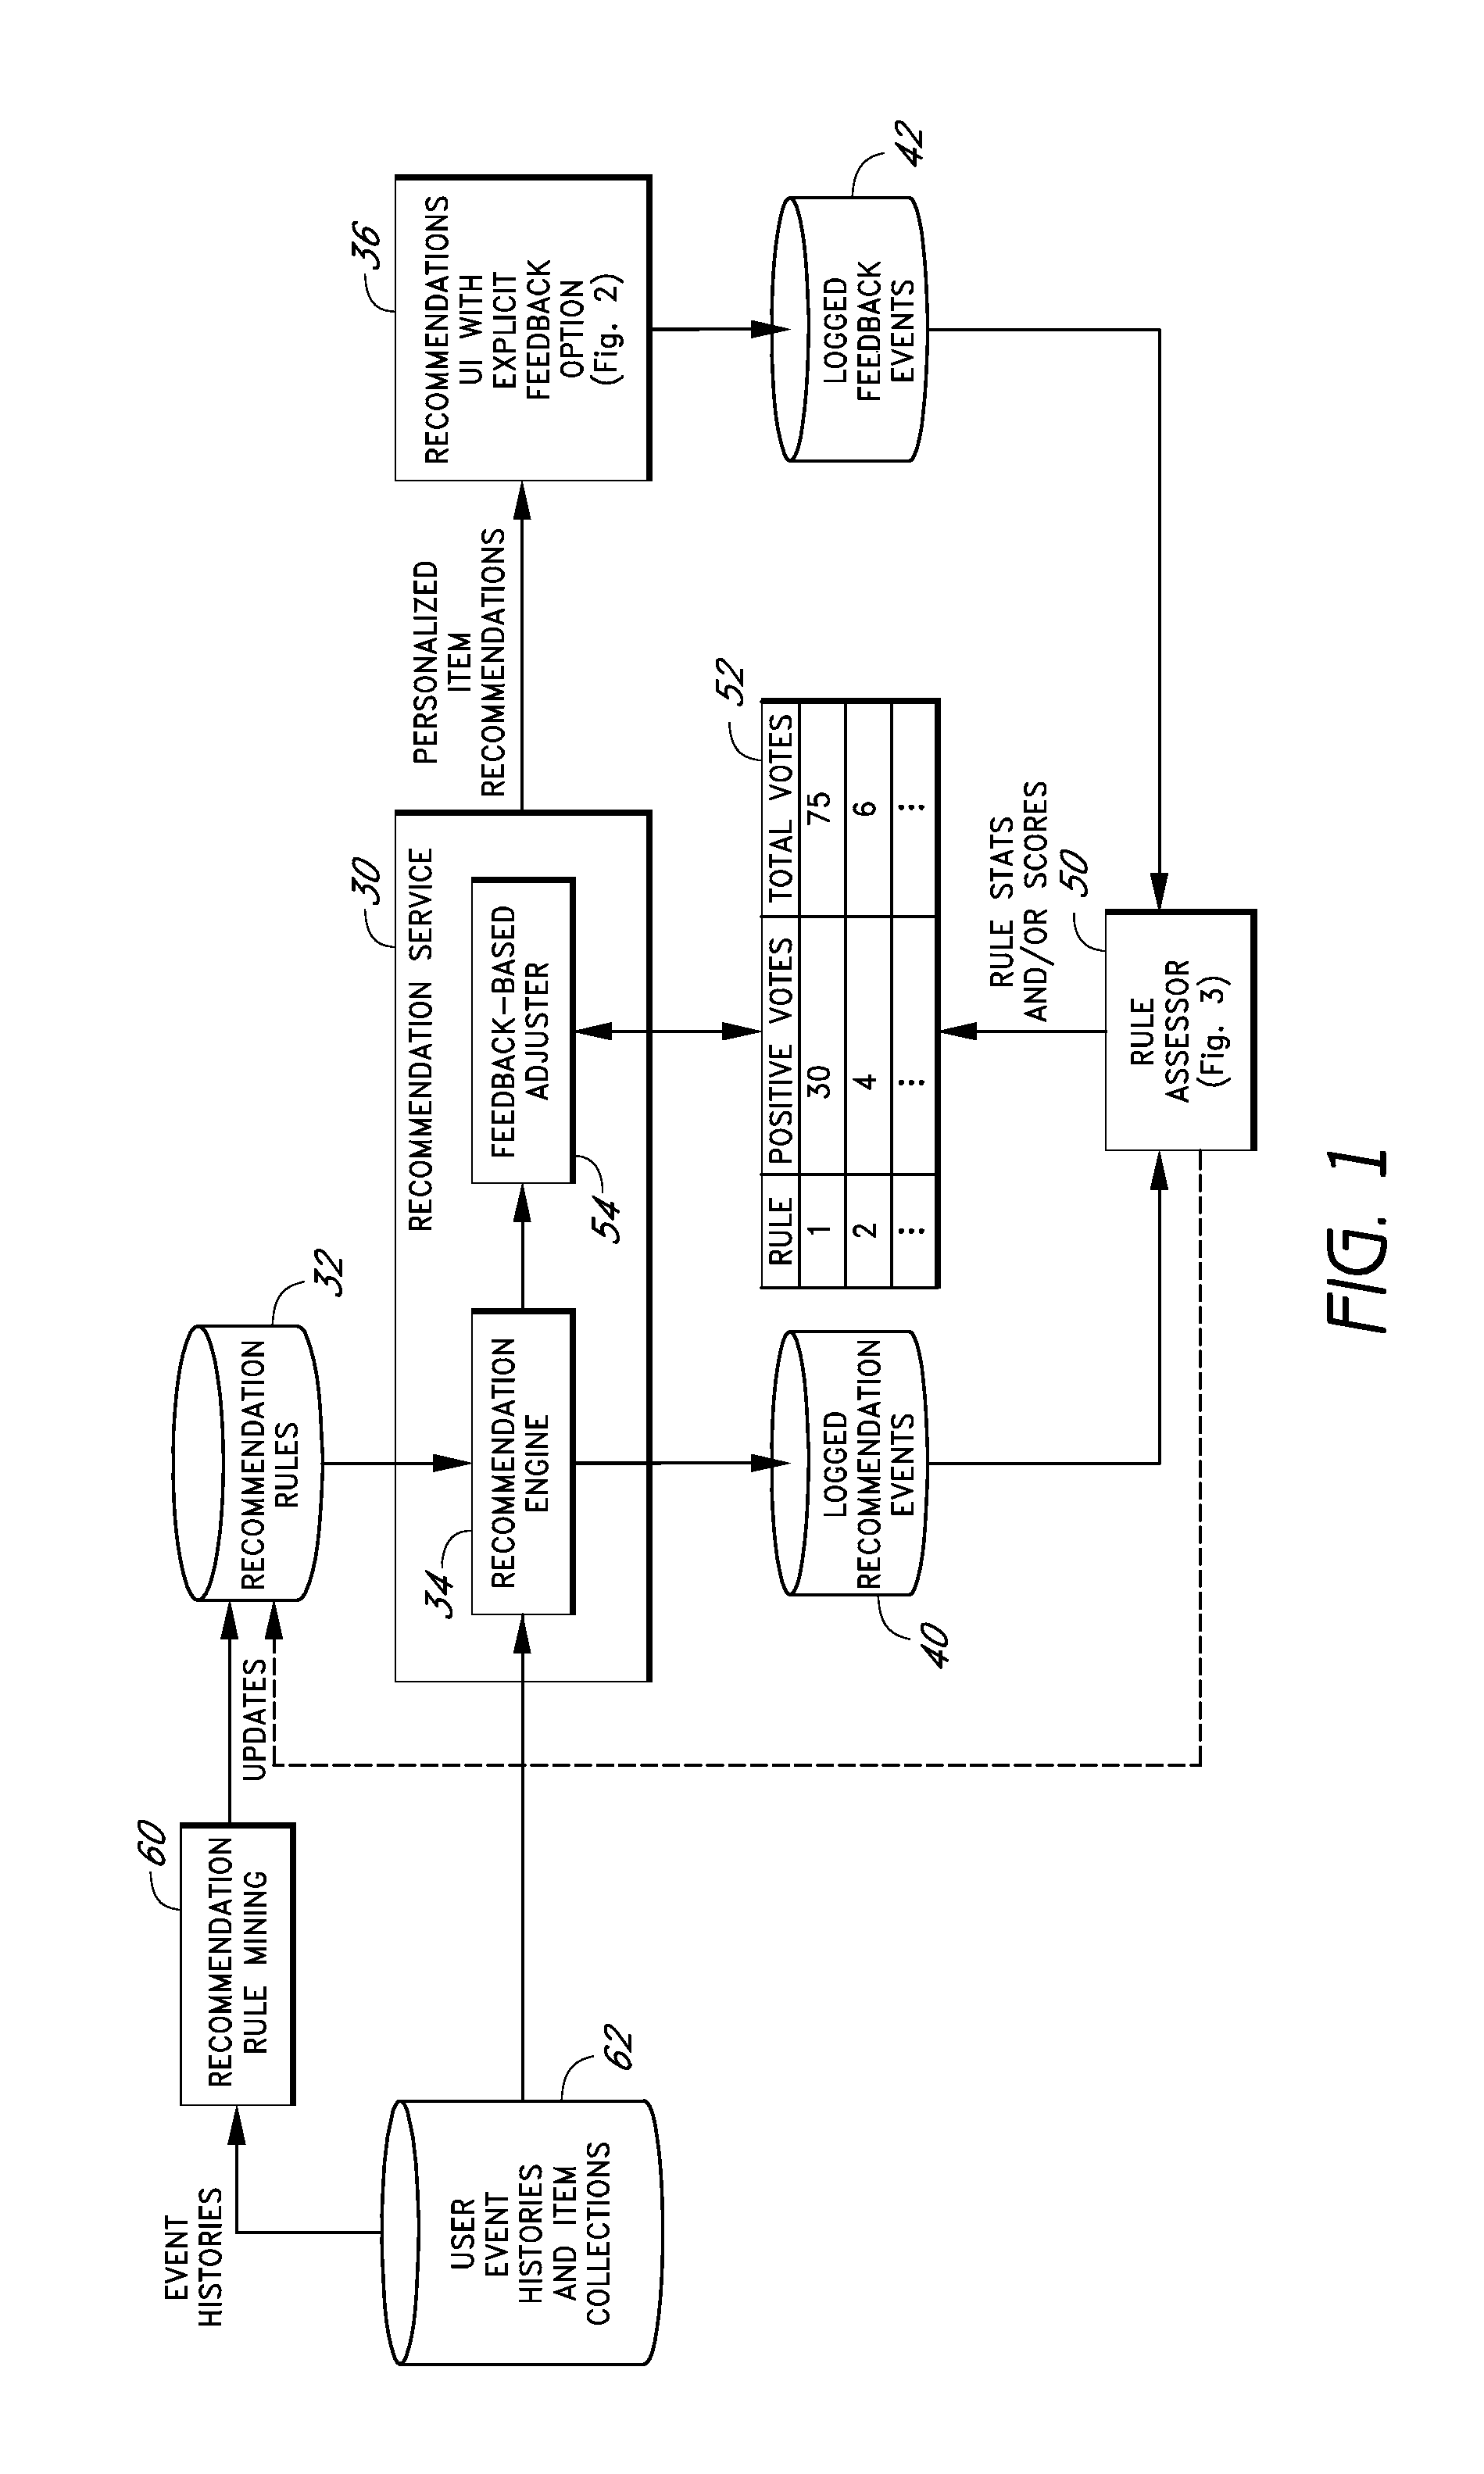 Method and system for associating feedback with recommendation rules